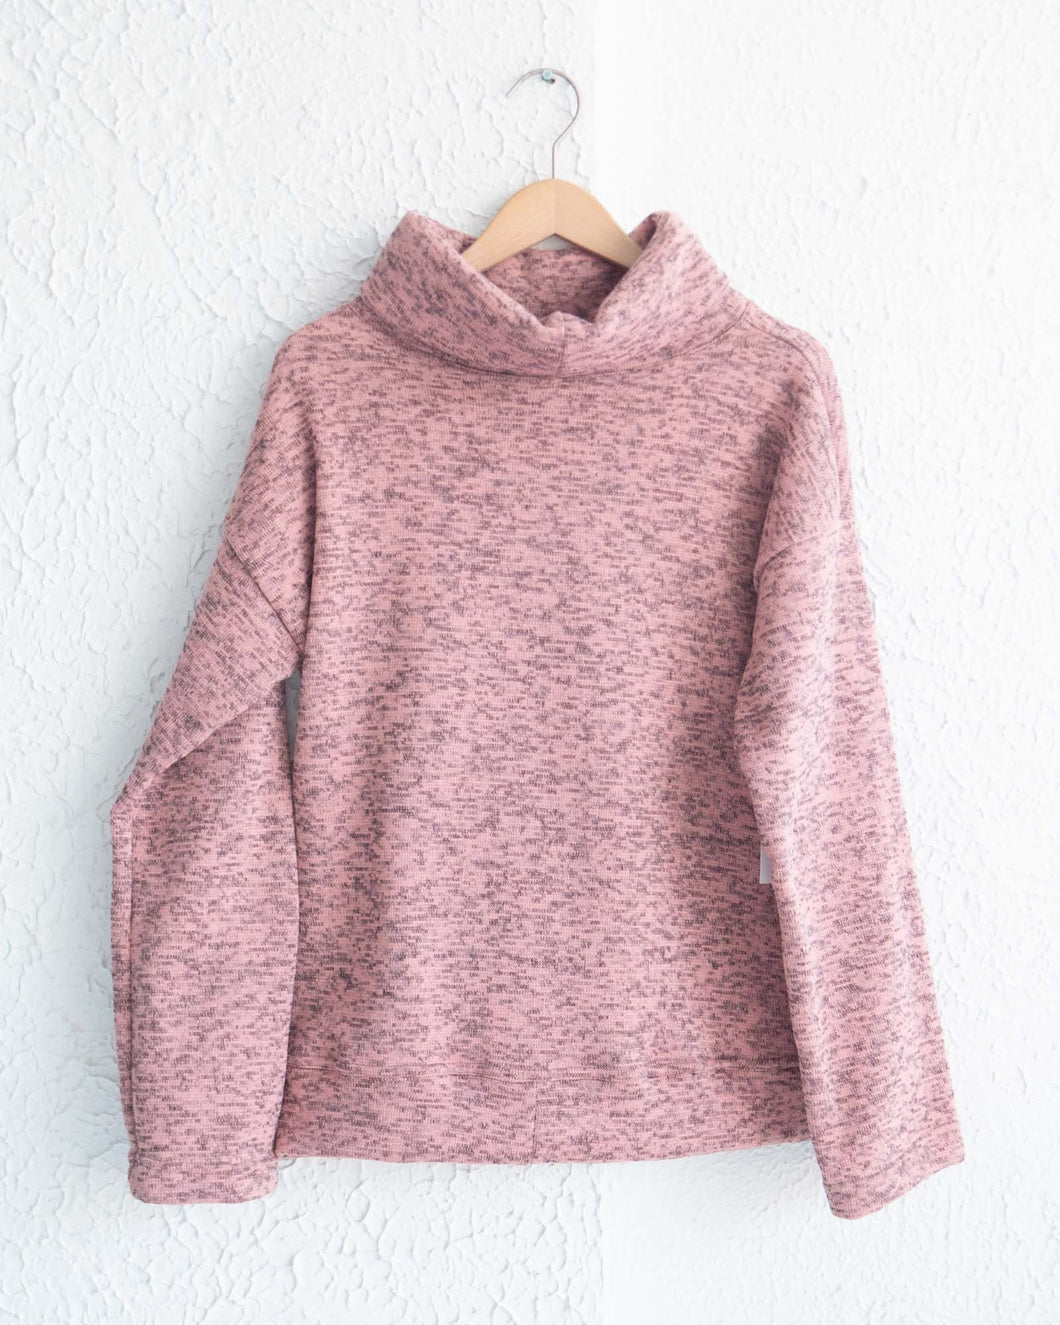 Dusty Rose Cowl Neck Sweater